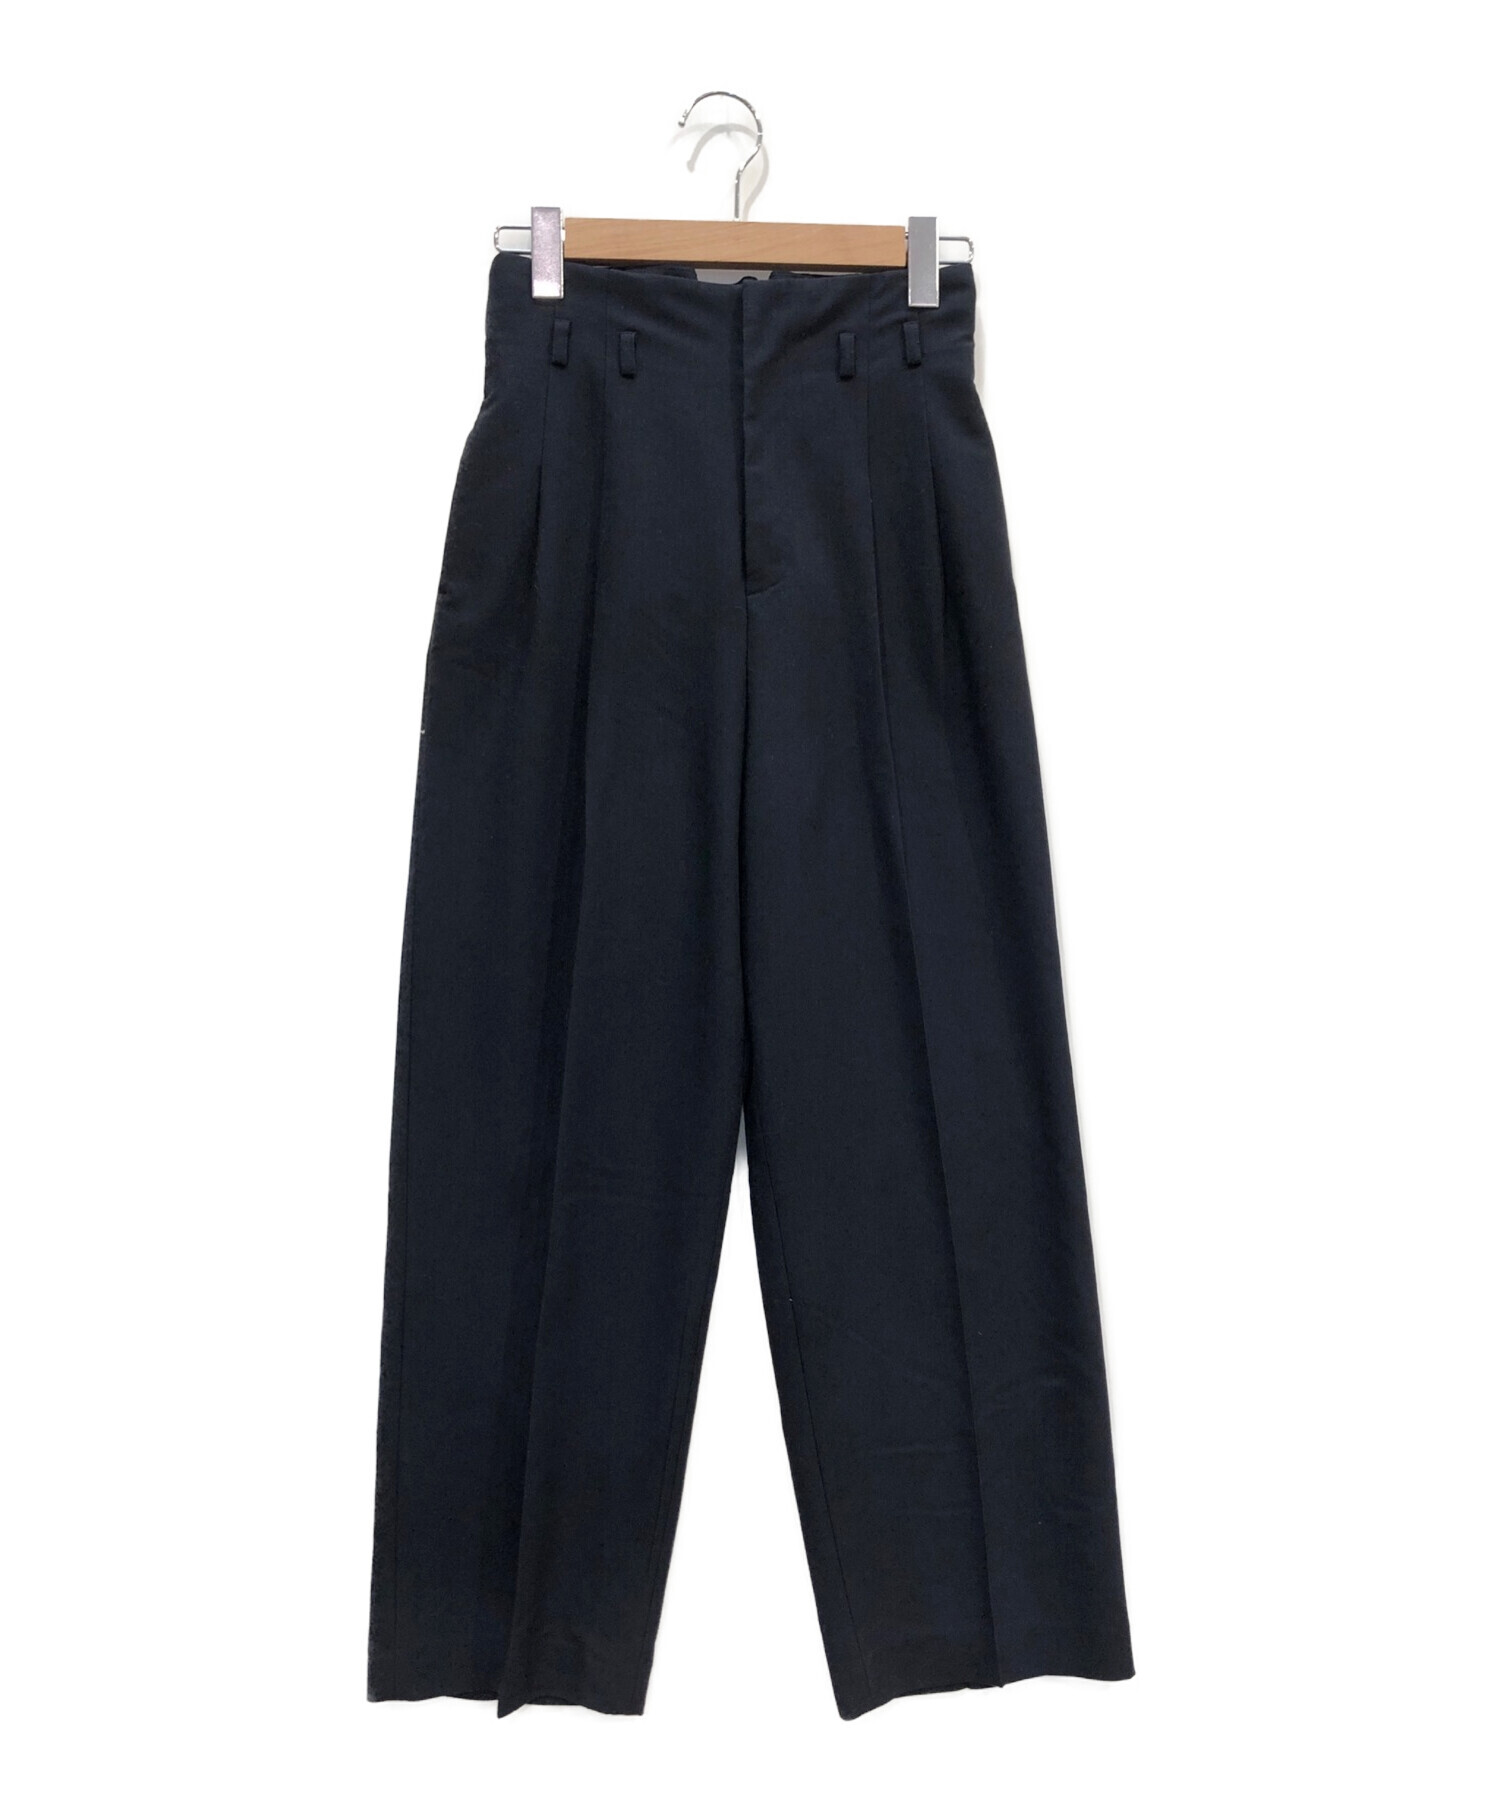 SHAPELY HIGH WAIST PANTS アメリヴィンテージピスタチオサイズ